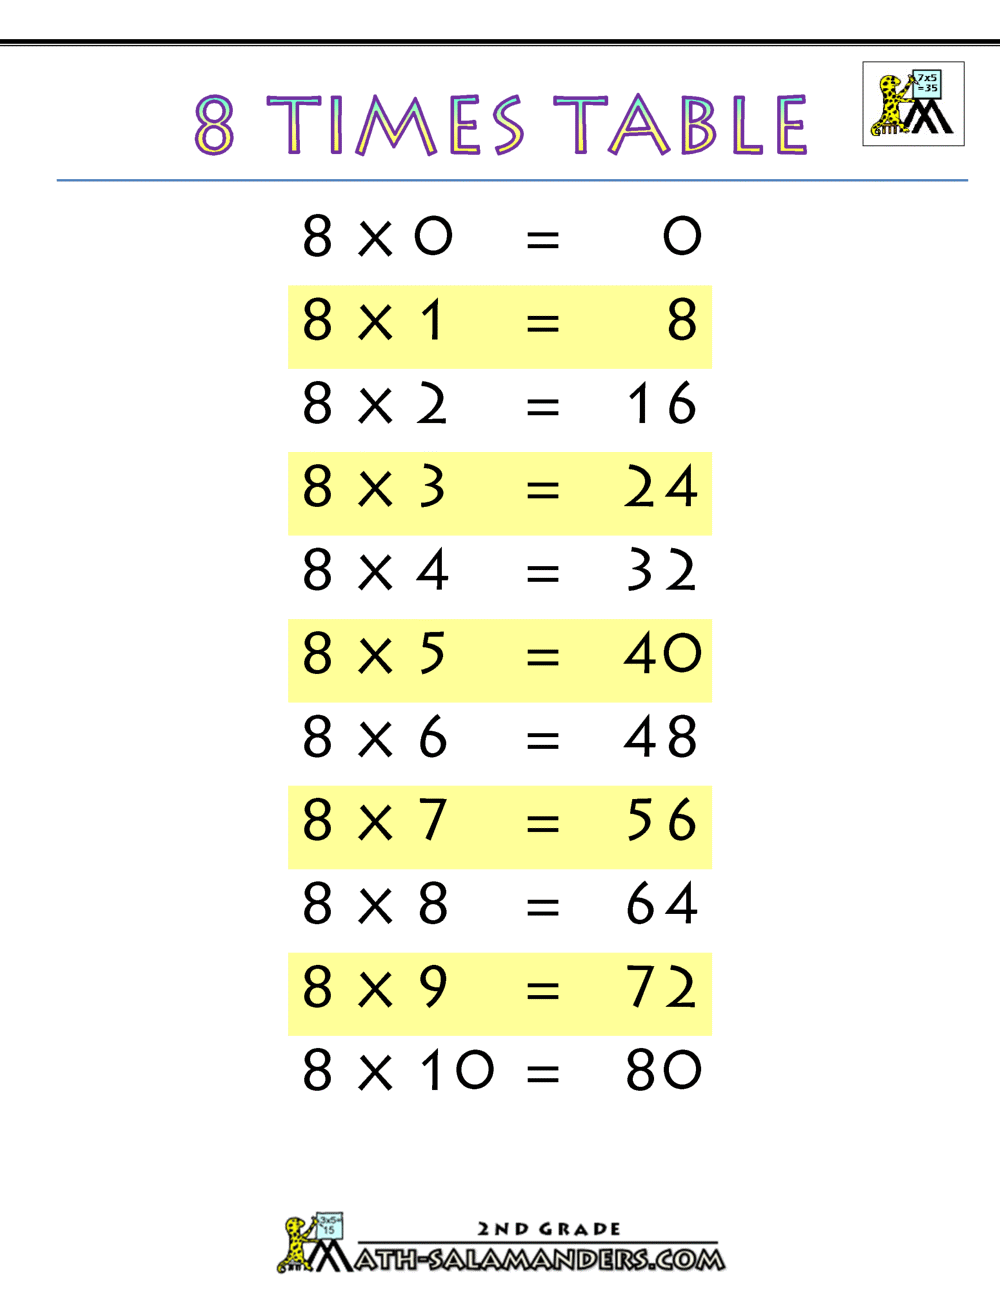  8 Times Table